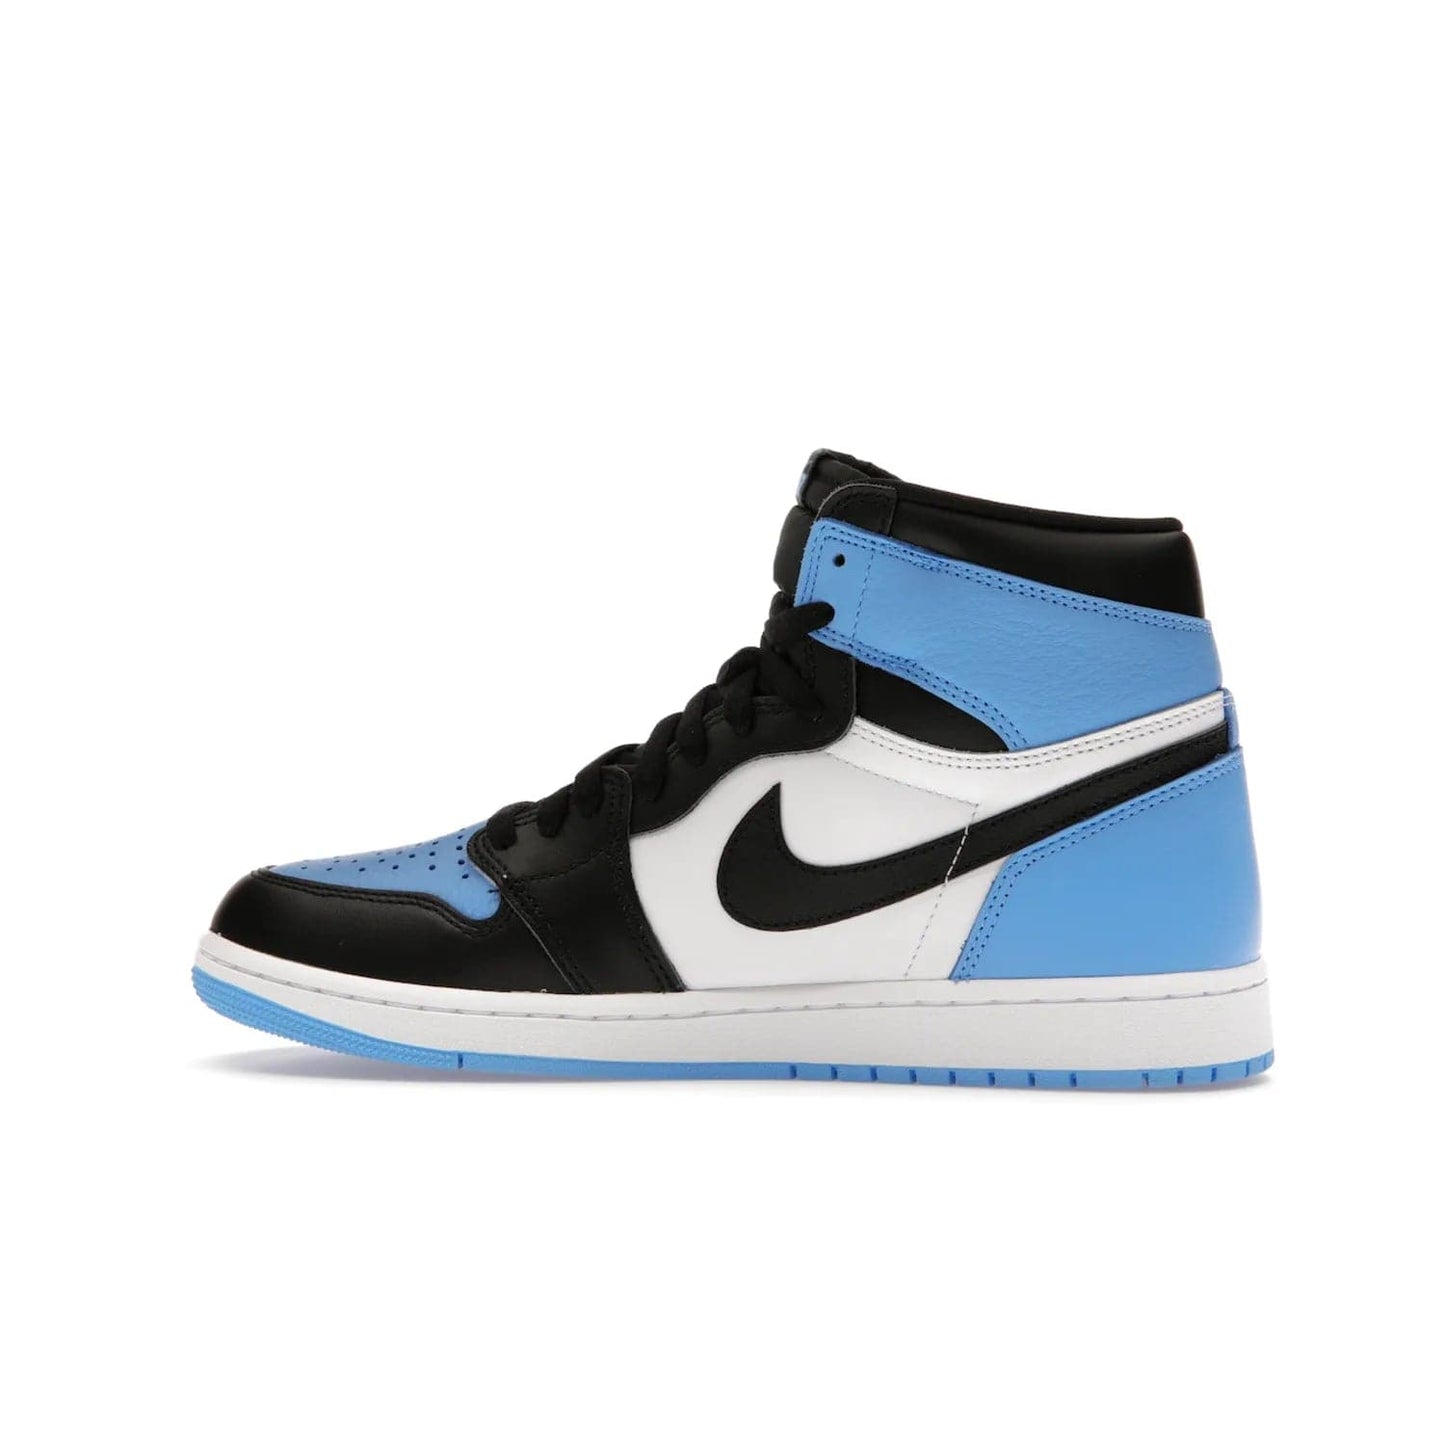 Jordan 1 Retro High OG UNC Toe - Image 20 - Only at www.BallersClubKickz.com - Jordan 1 High OG UNC Toe is a fashionable, high-quality sneaker featuring University Blue, Black White and White. Releasing July 22, 2023, it's the perfect pick up for sneakerheads.